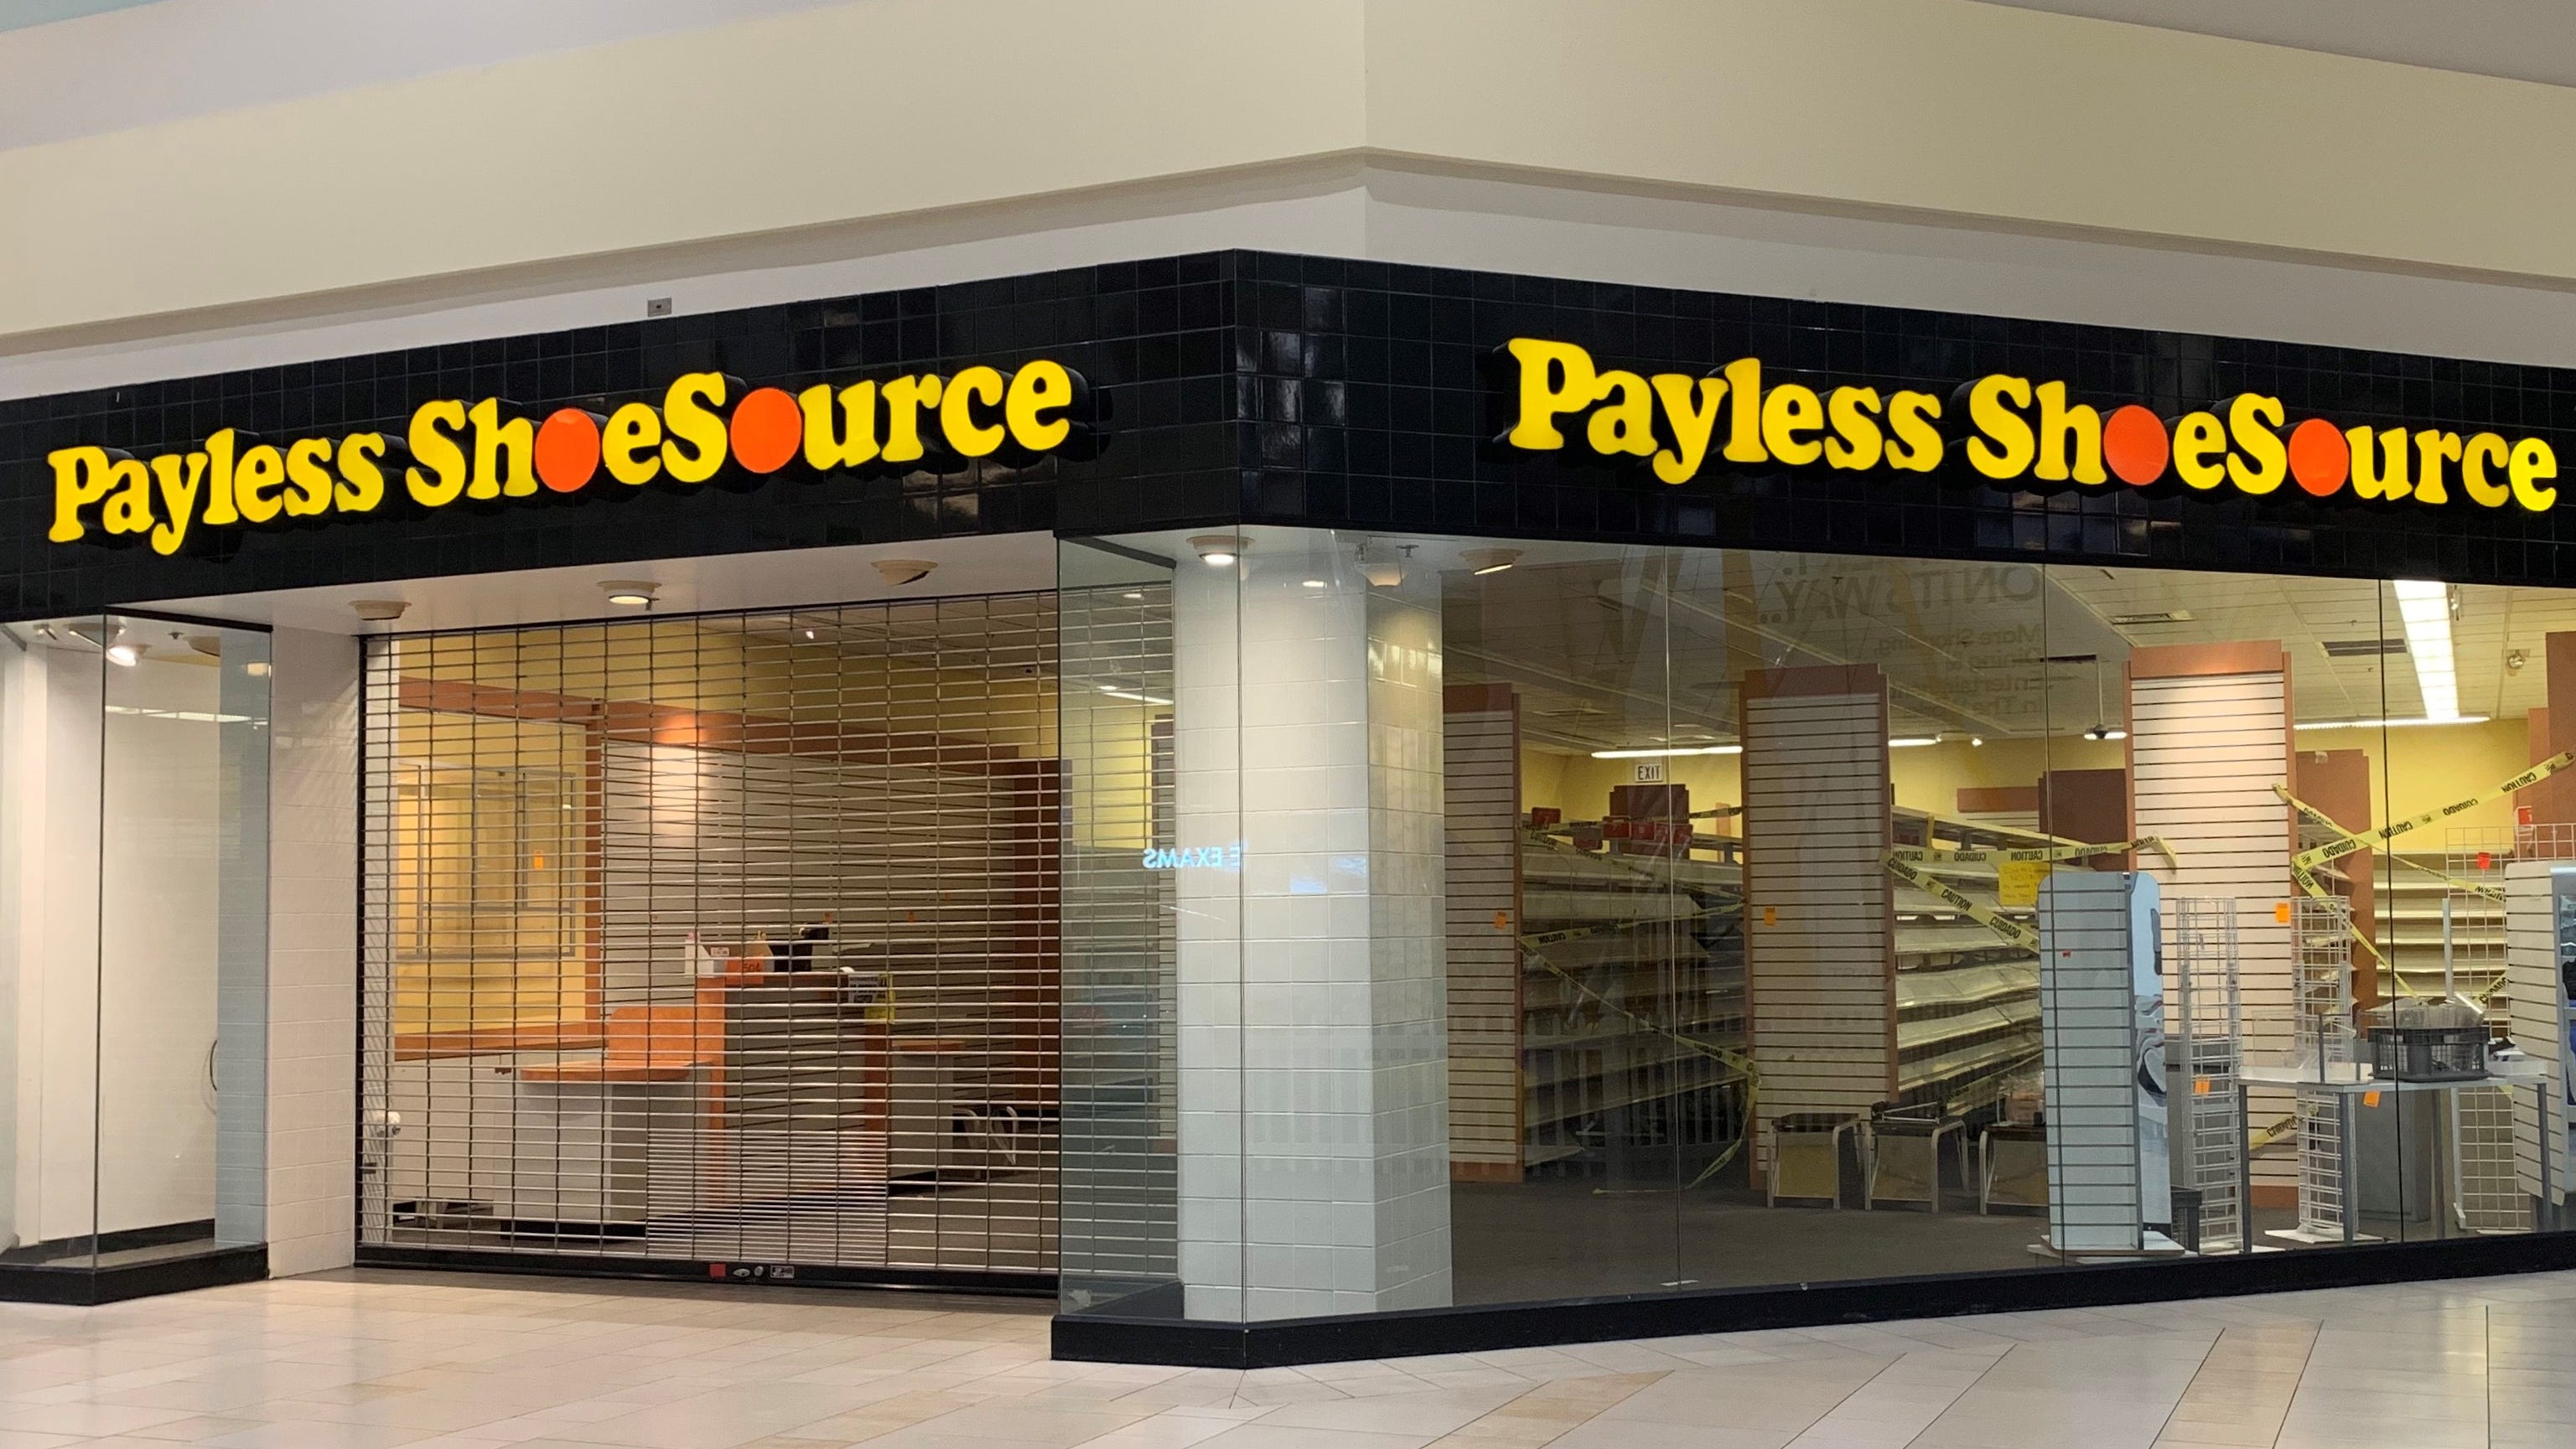 Payless comeback: New online store launches, physical stores coming